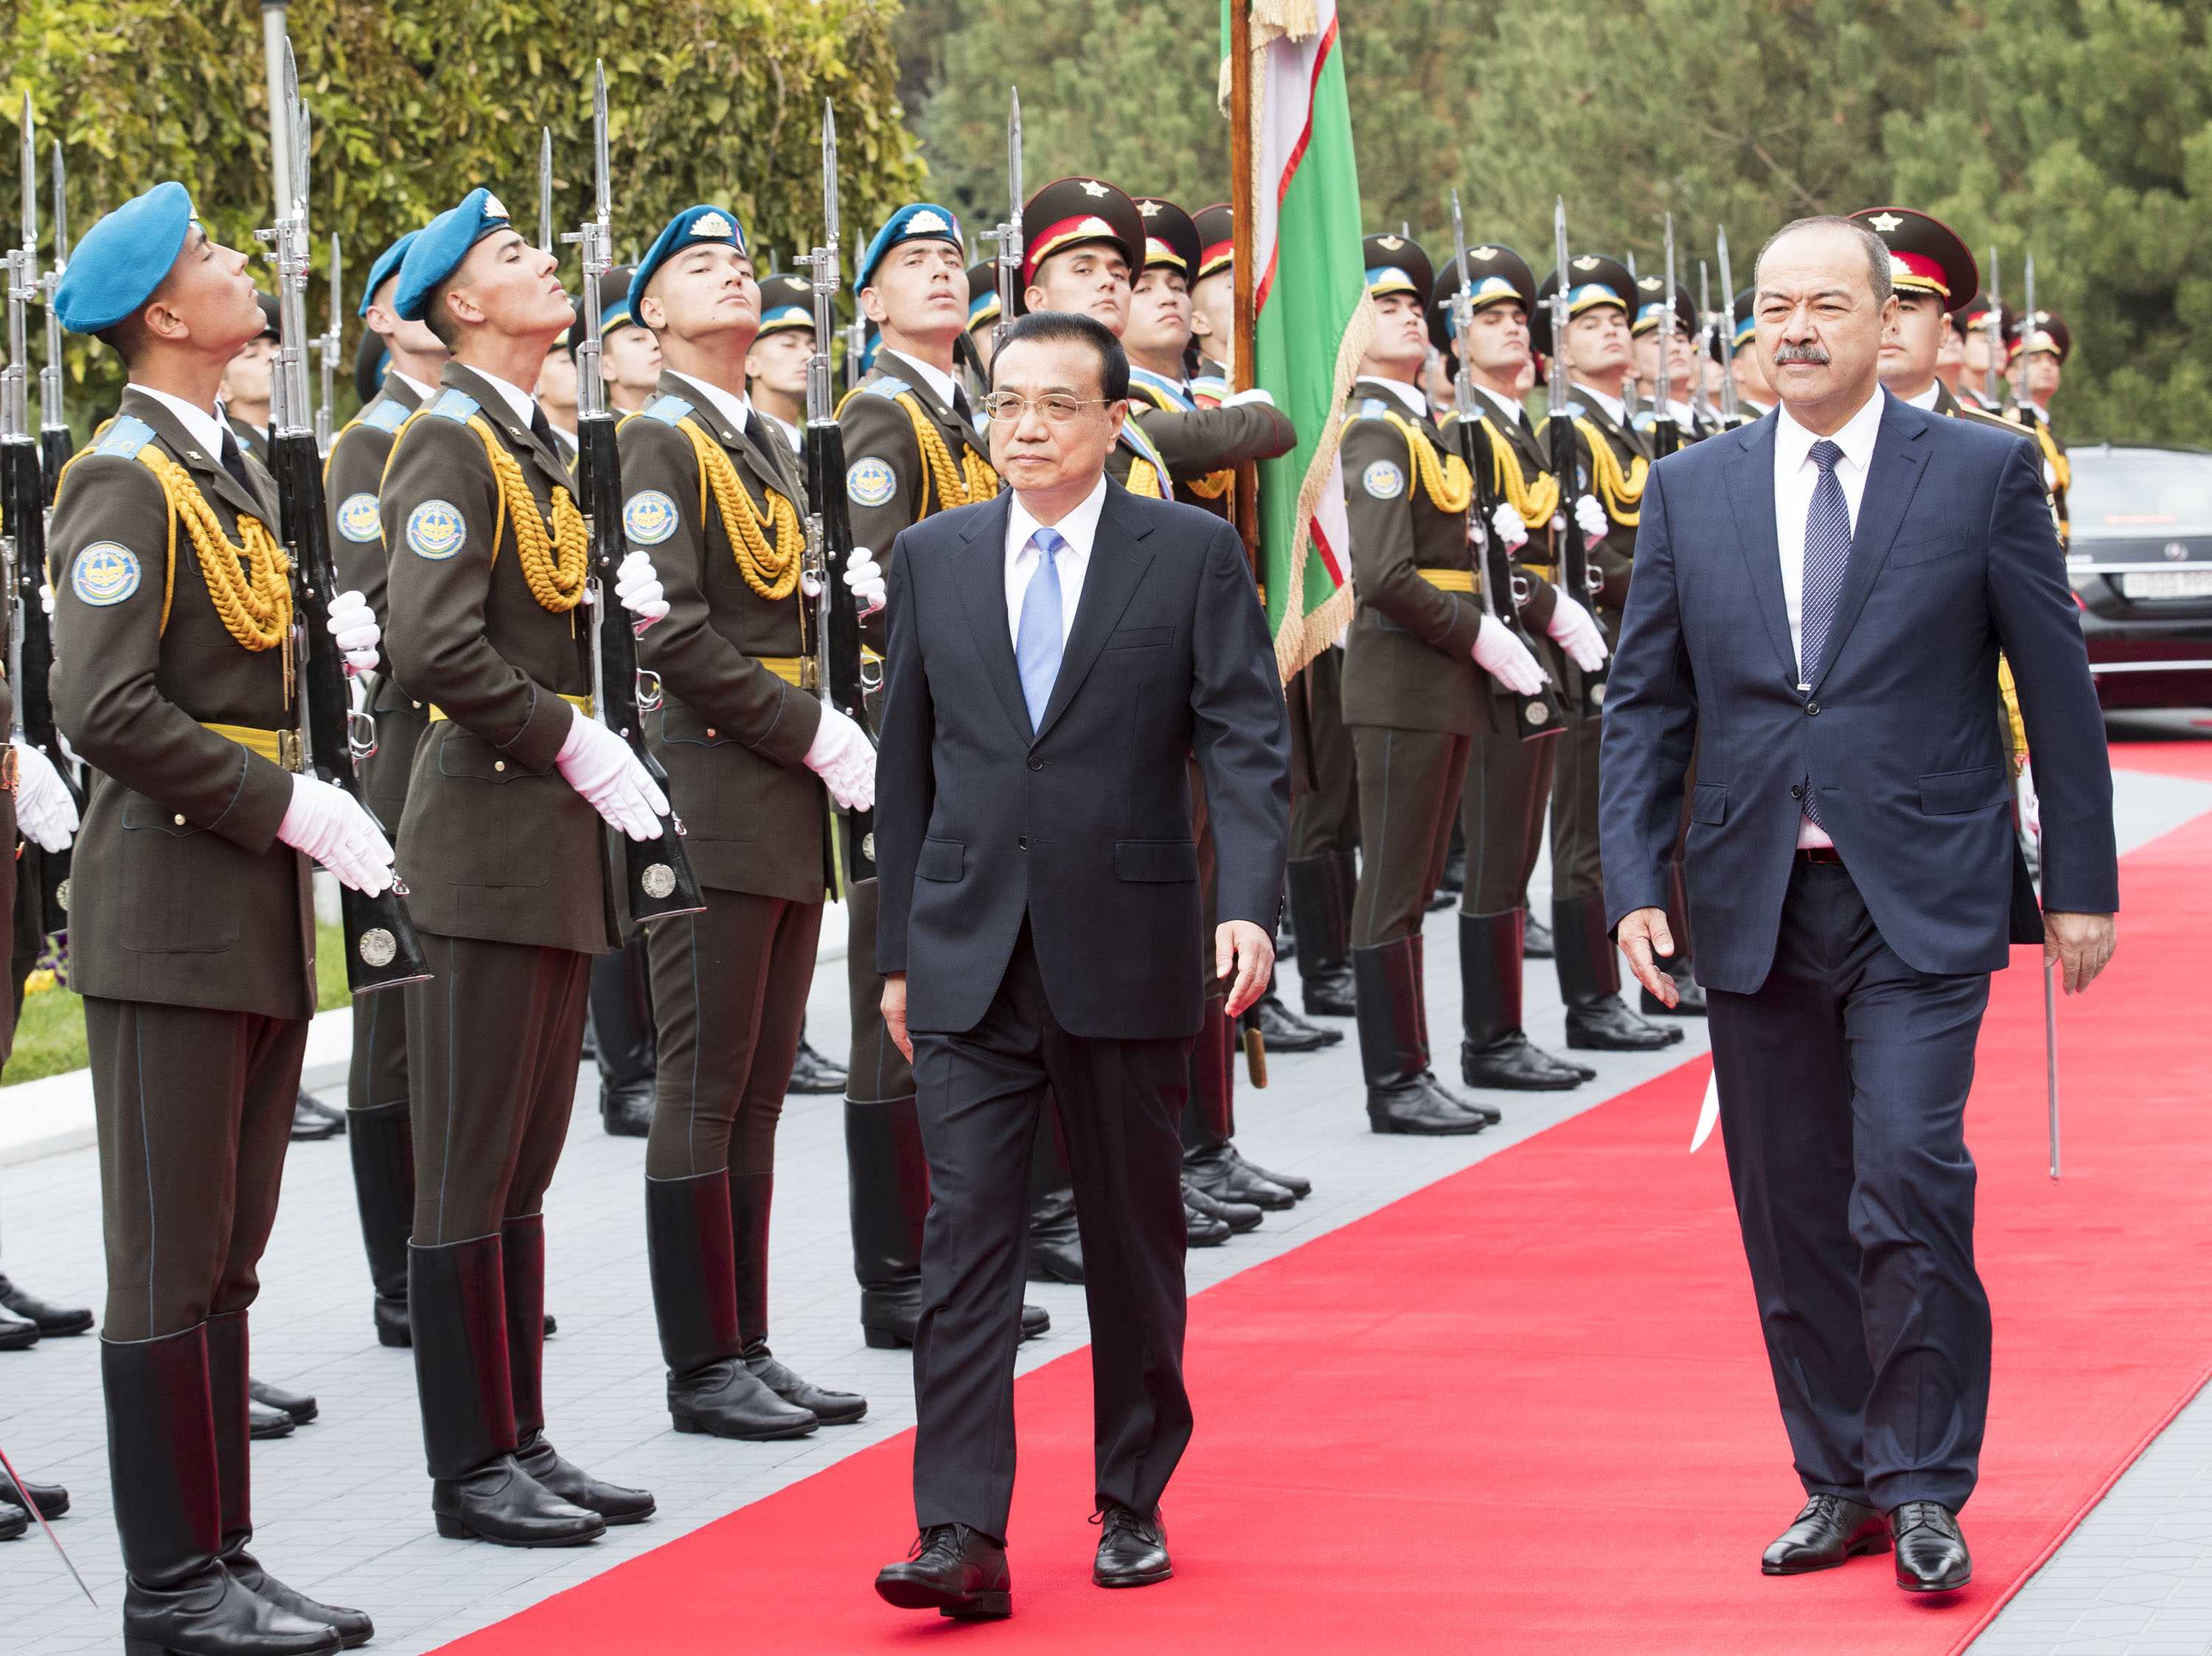 Chinese Premier Li Keqiang, accompanied by Uzbek Prime Minister Abdulla Aripov, inspects the guard of honor during a welcome ceremony in Tashkent, Uzbekistan on Nov. 1, 2019. (Xinhua/Huang Jingwen)